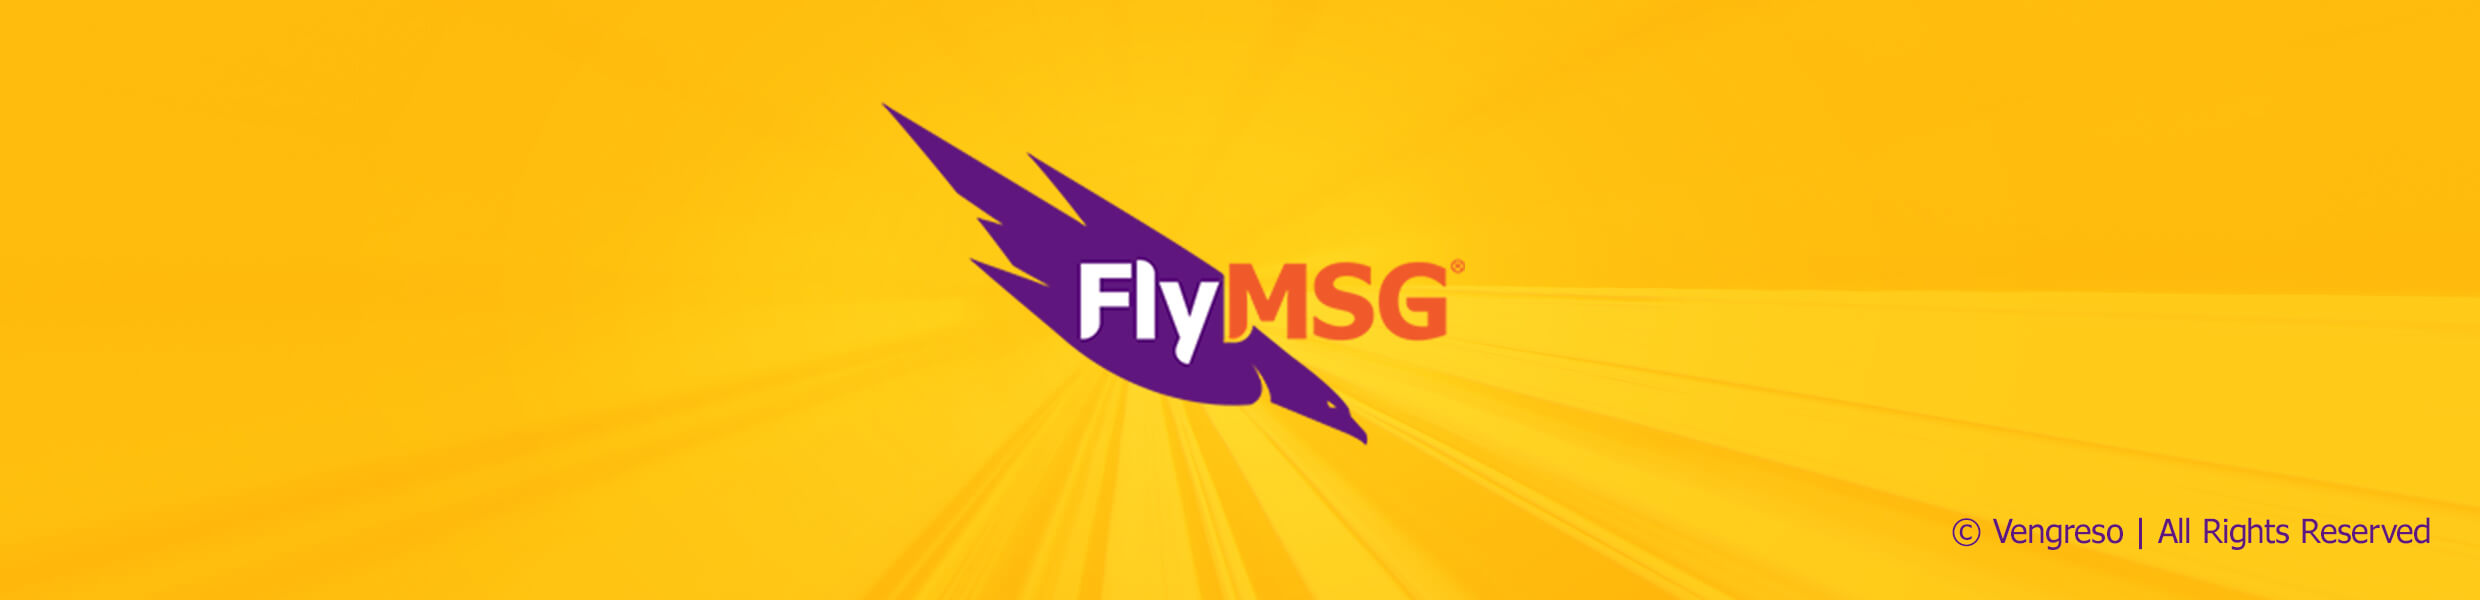 FlyMSG Logo to Save Your Time